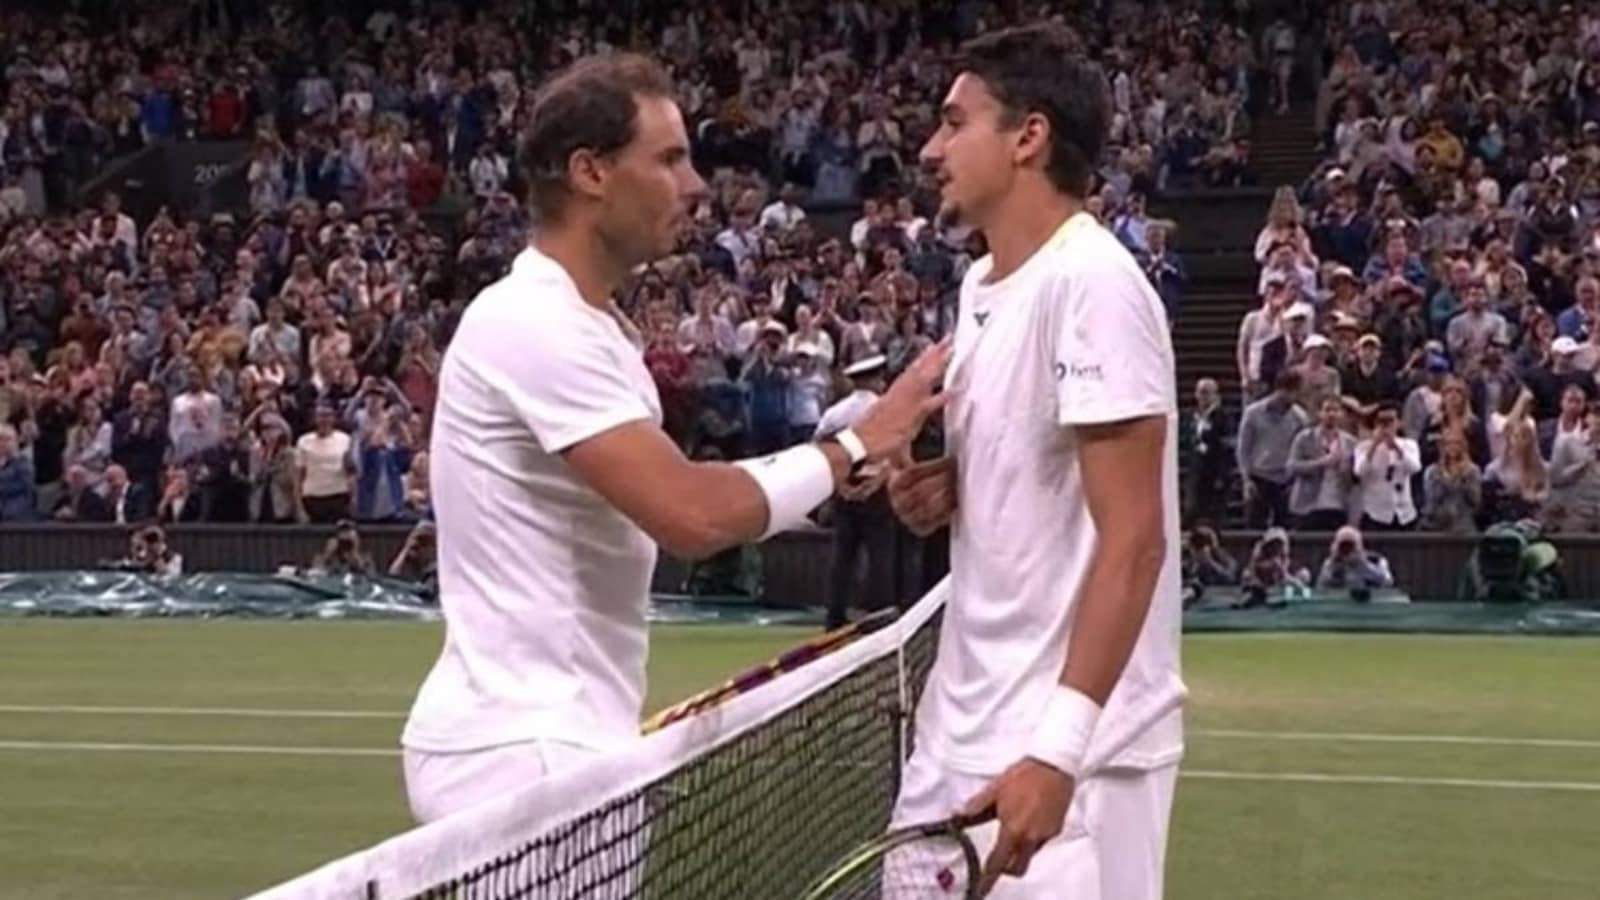 ‘He distracted me’: Nadal accused of poor sportsmanship by Sonego after Wimbledon tie, Spaniard apologises – Watch